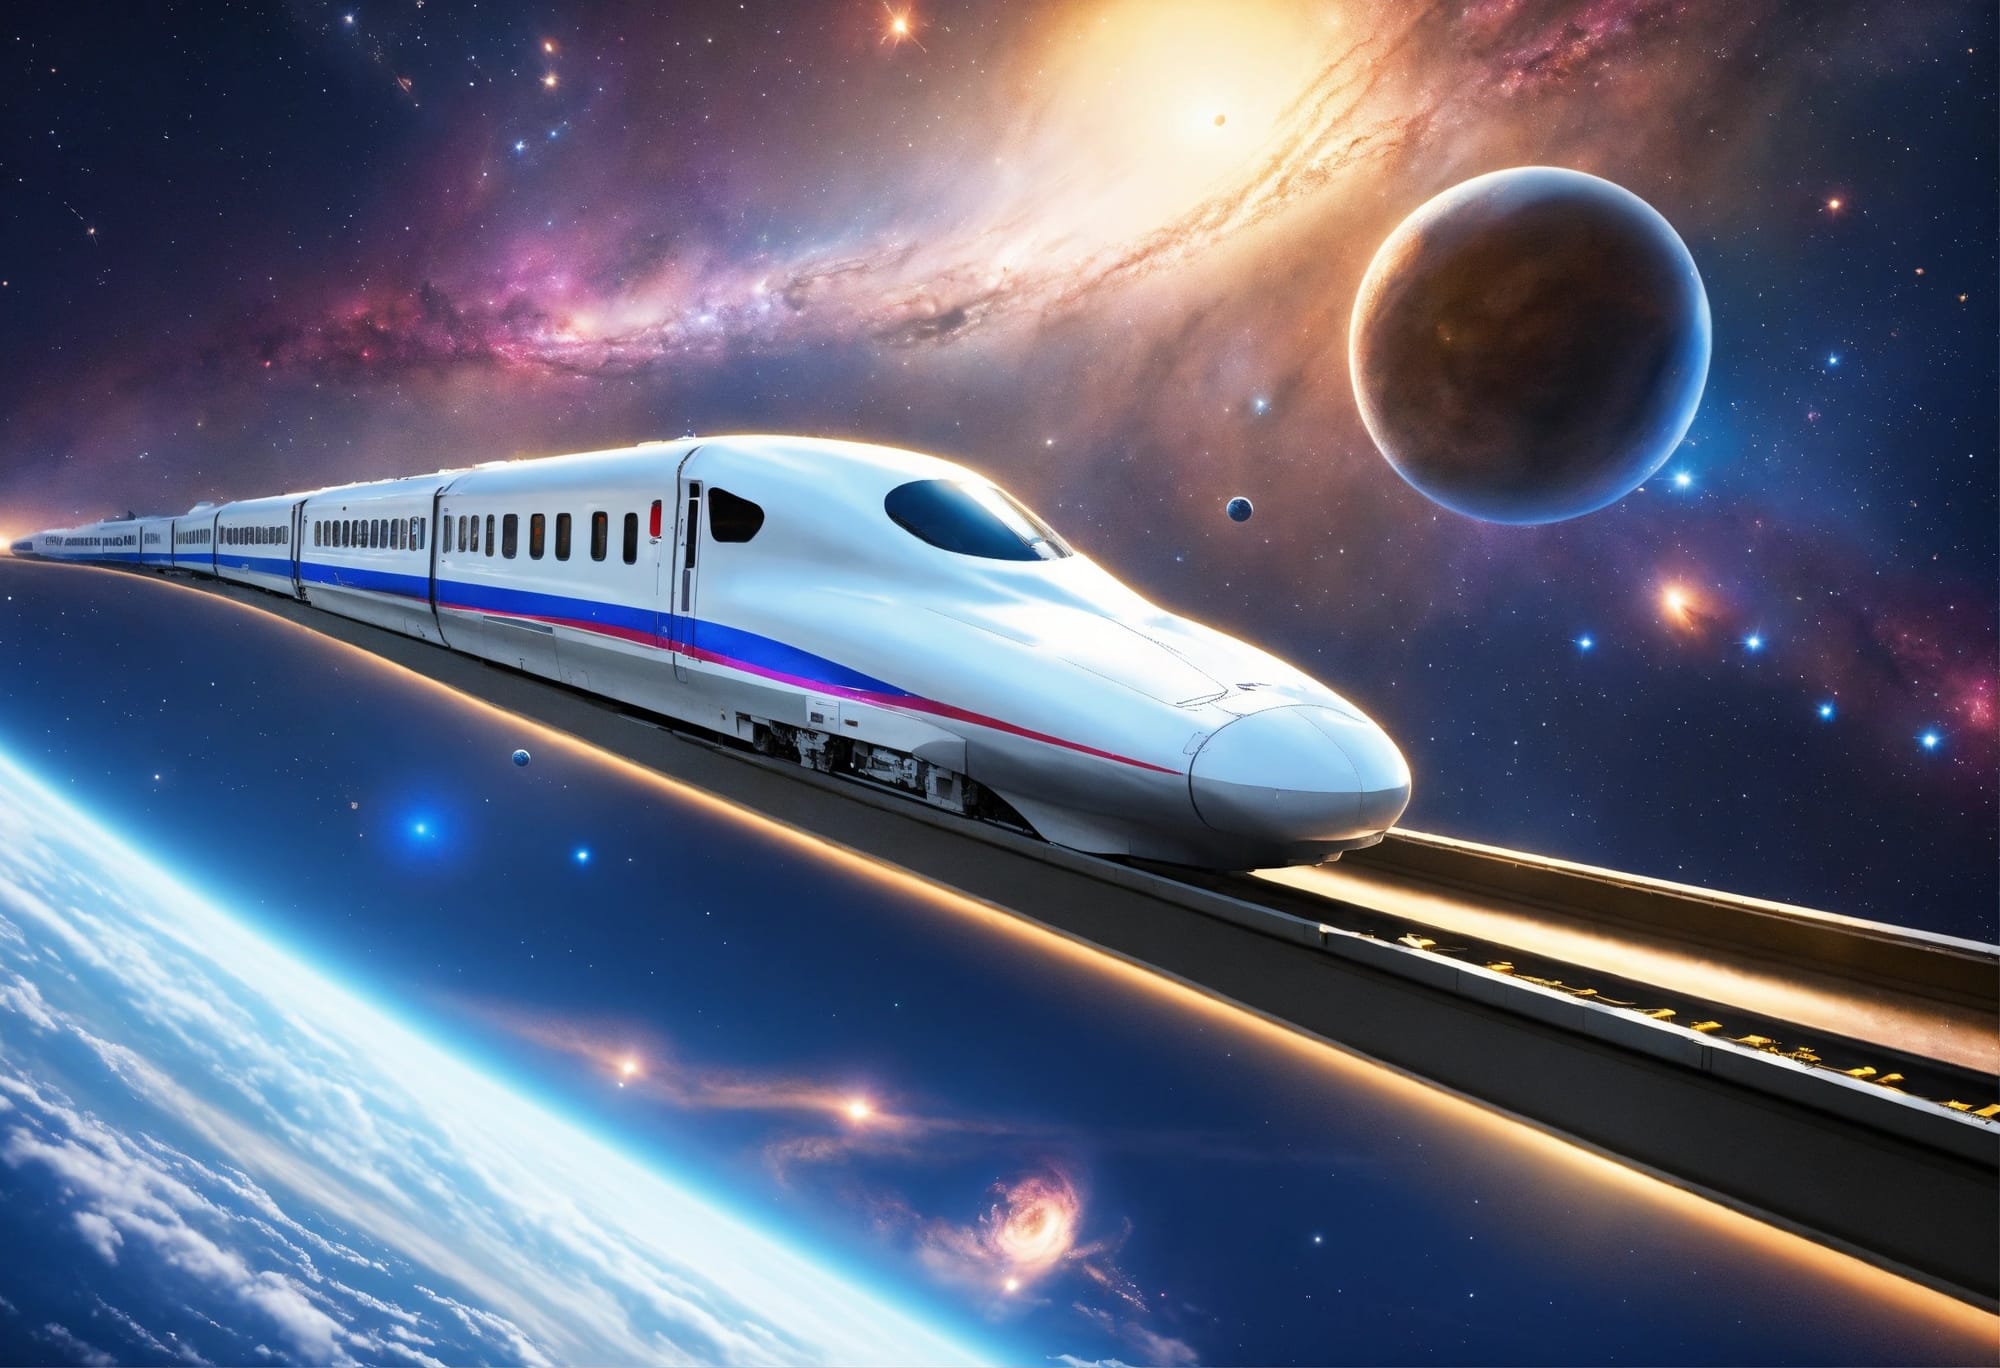 Japan's Ambitious Plan for a Bullet Train to the Moon: The Future is Now